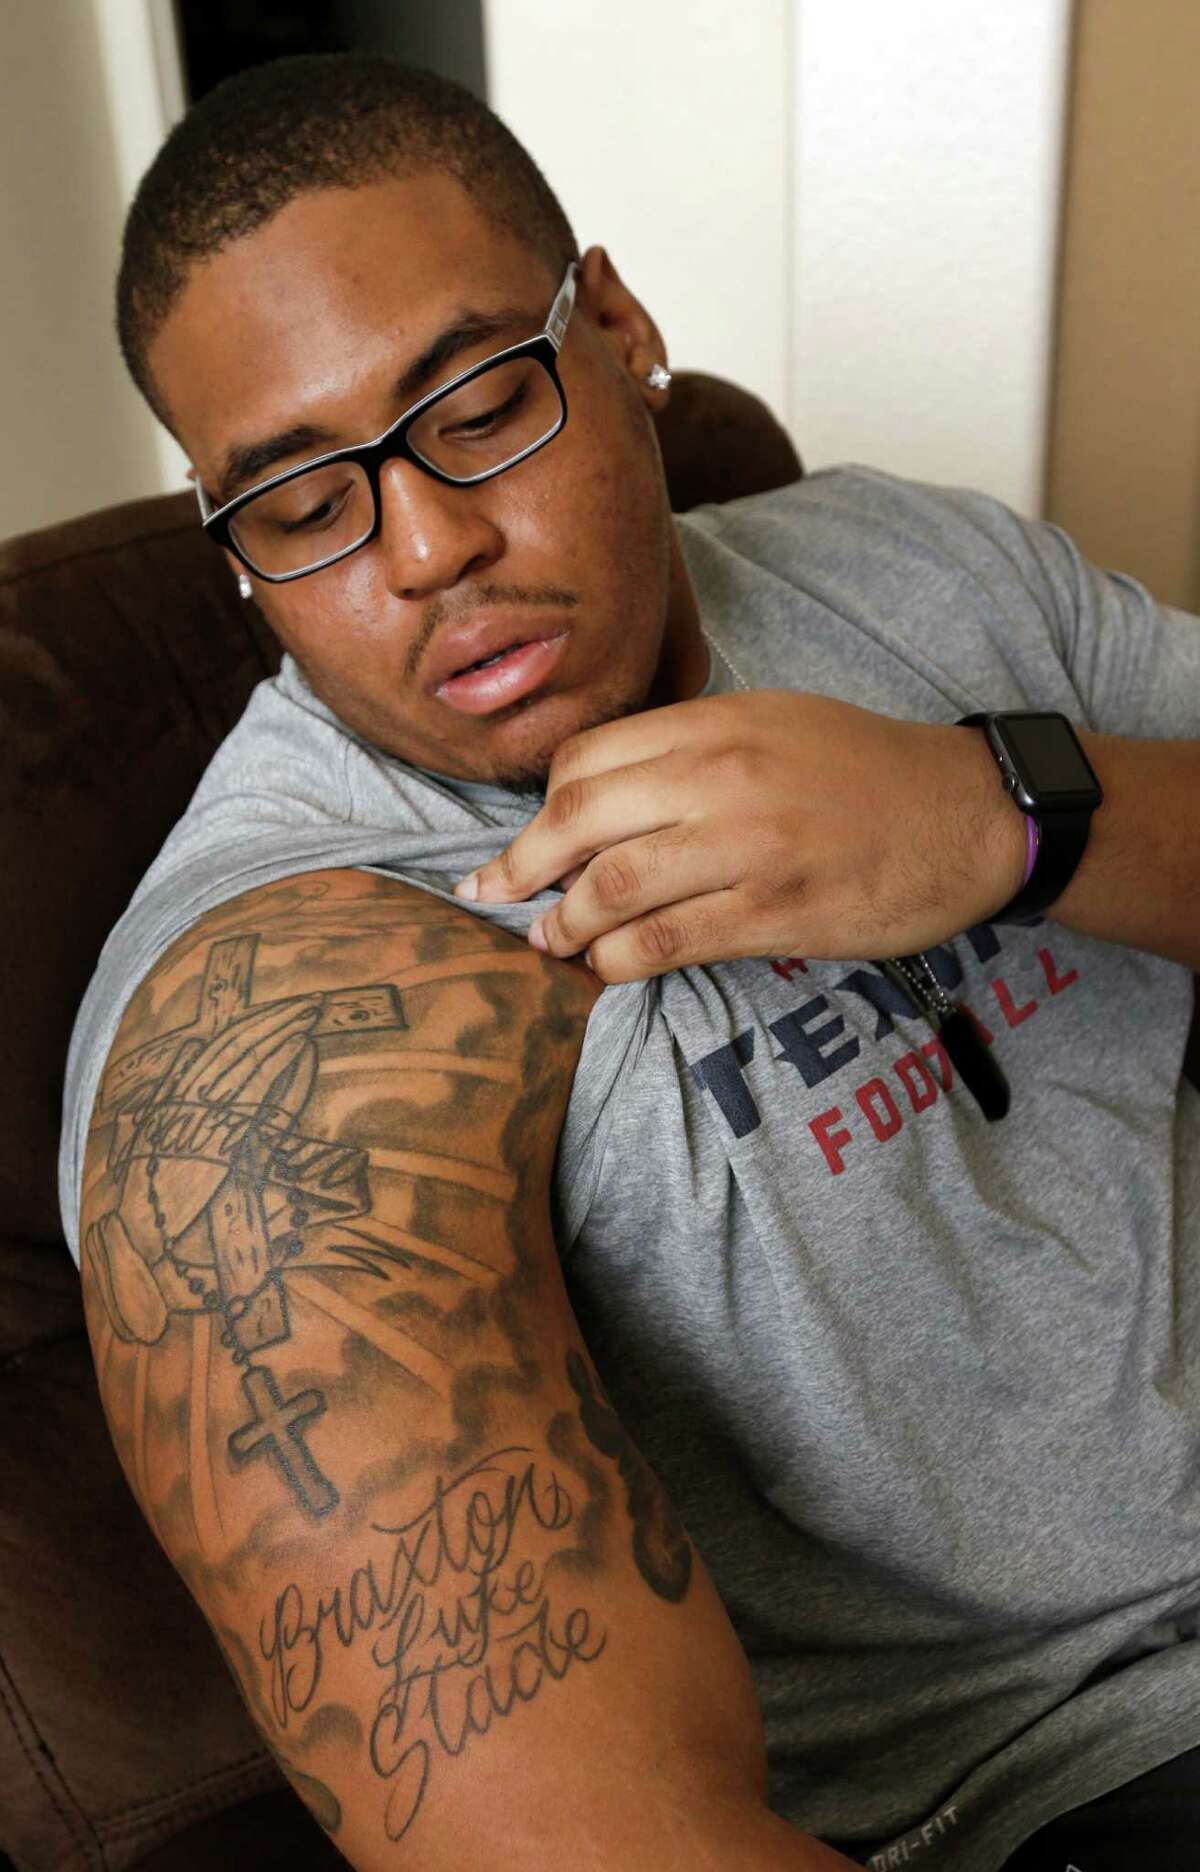 Texans practice squad player Chad Slade talks about his tattoos in honor of his late grandmother and his 14-month-old son, Braxton Slade, while watching the Texans and Packers game on television at his home Sunday, Dec. 4, 2016, in Pearland. ( Melissa Phillip / Houston Chronicle )